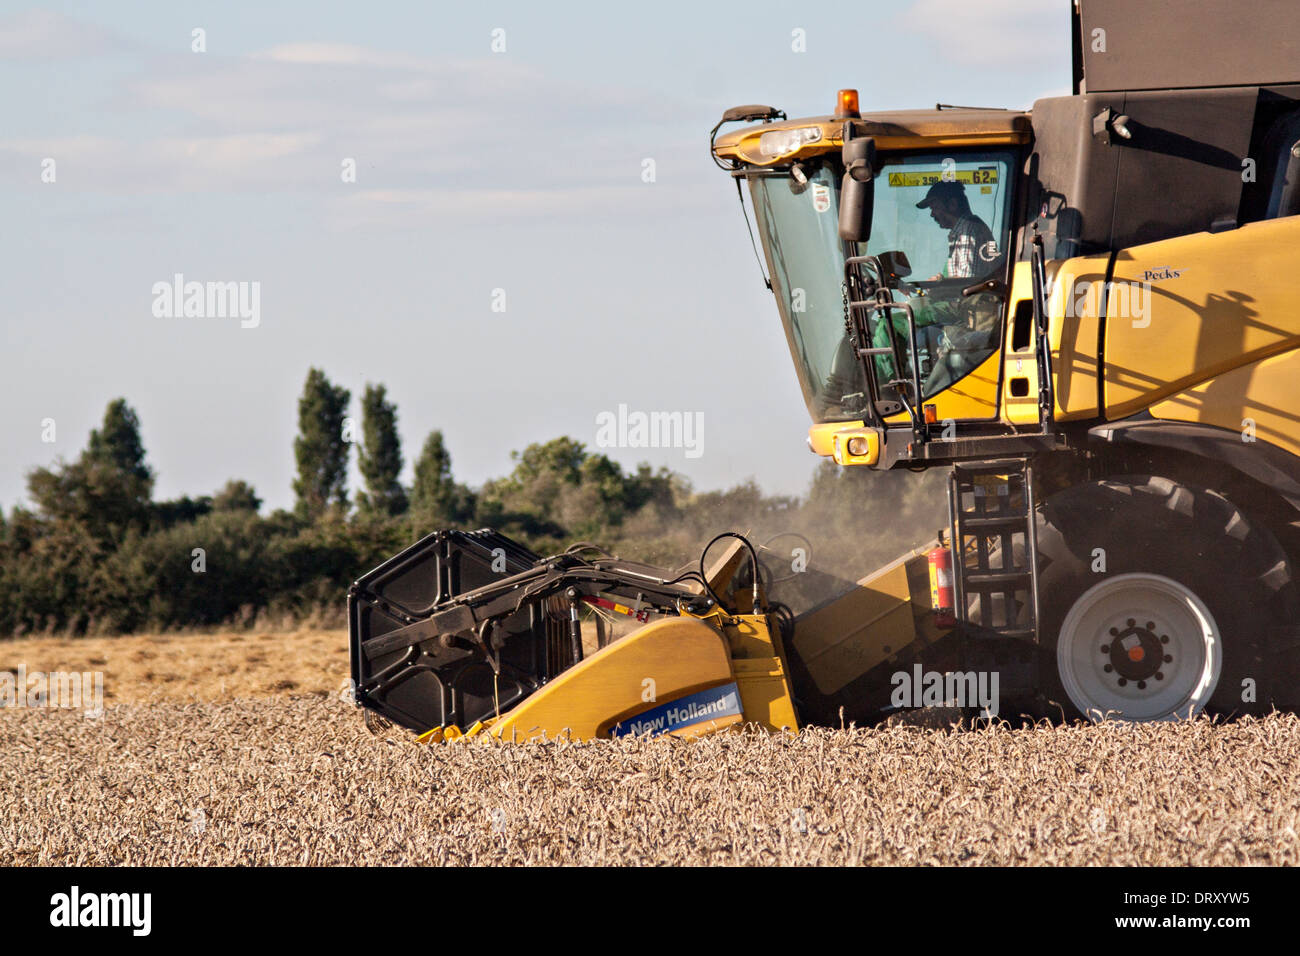 New Holland CX8090 combine harvester at work Stock Photo